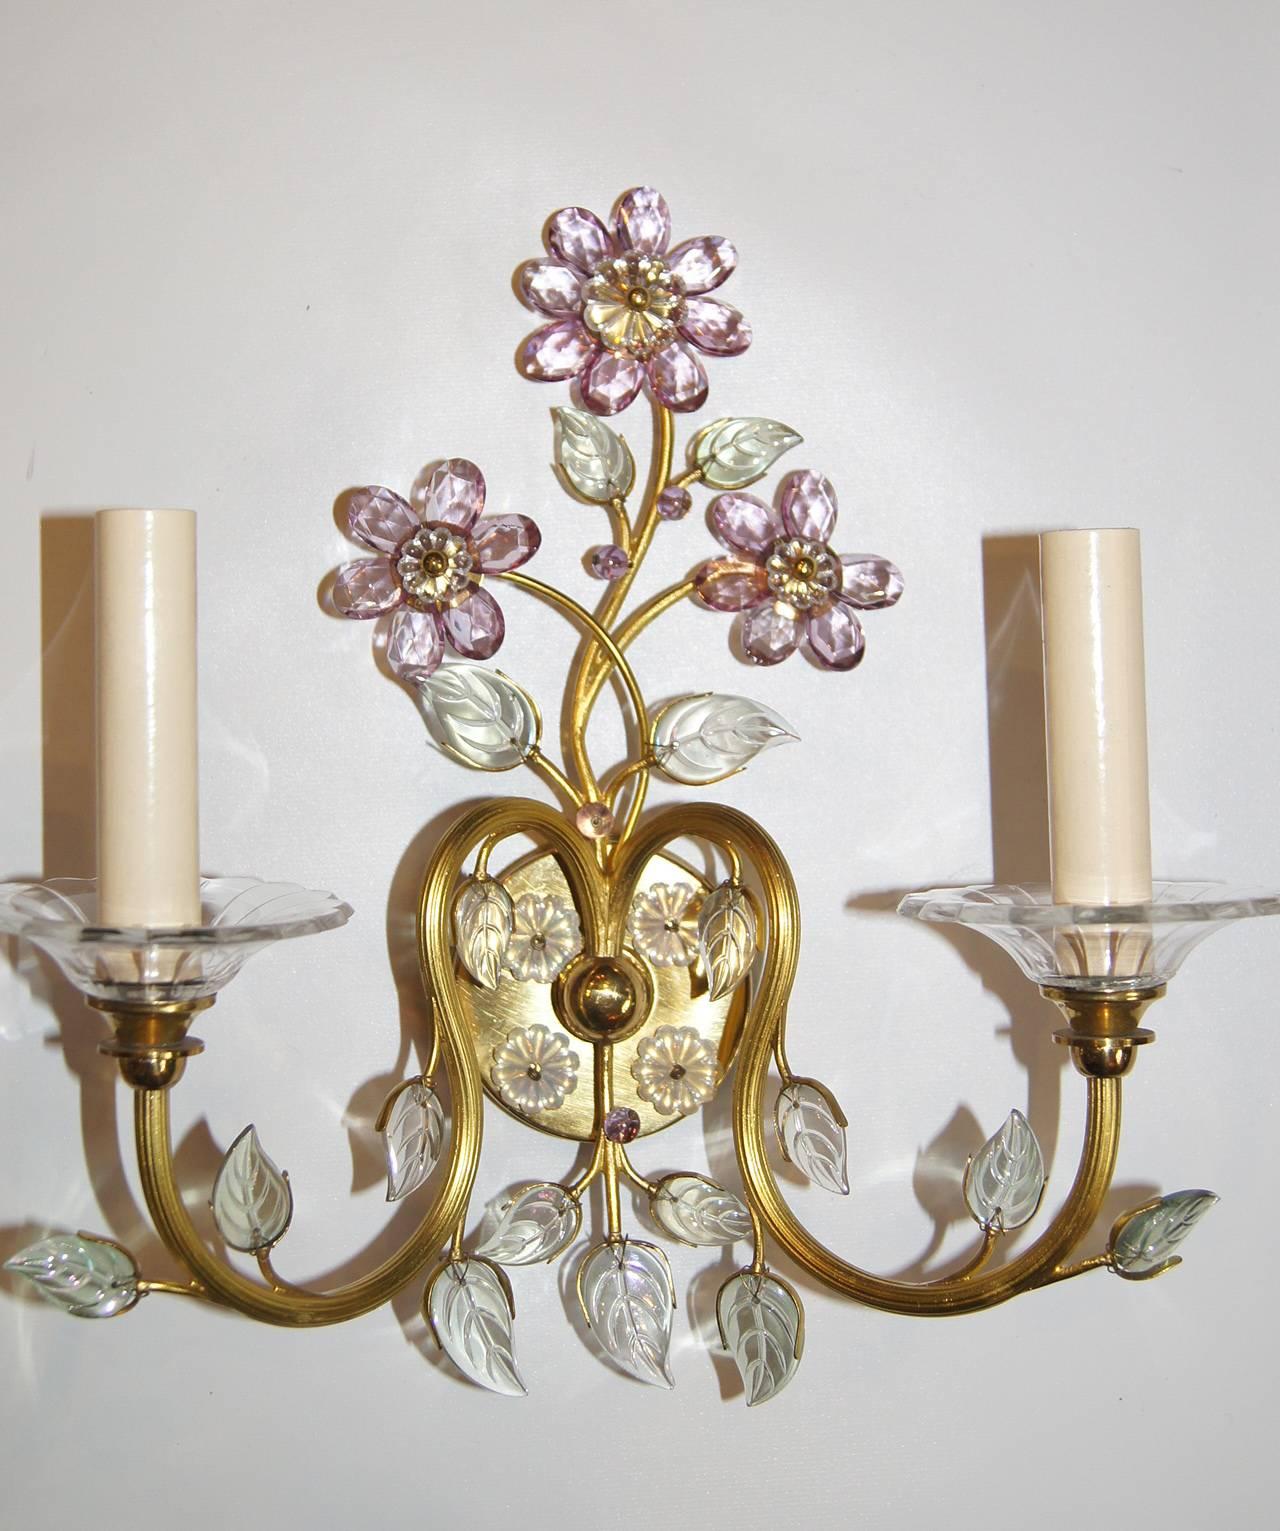 Pair of French 1920's gilt sconces with amethyst crystal flowers and molded glass leaves.

Measurements:
Height: 12